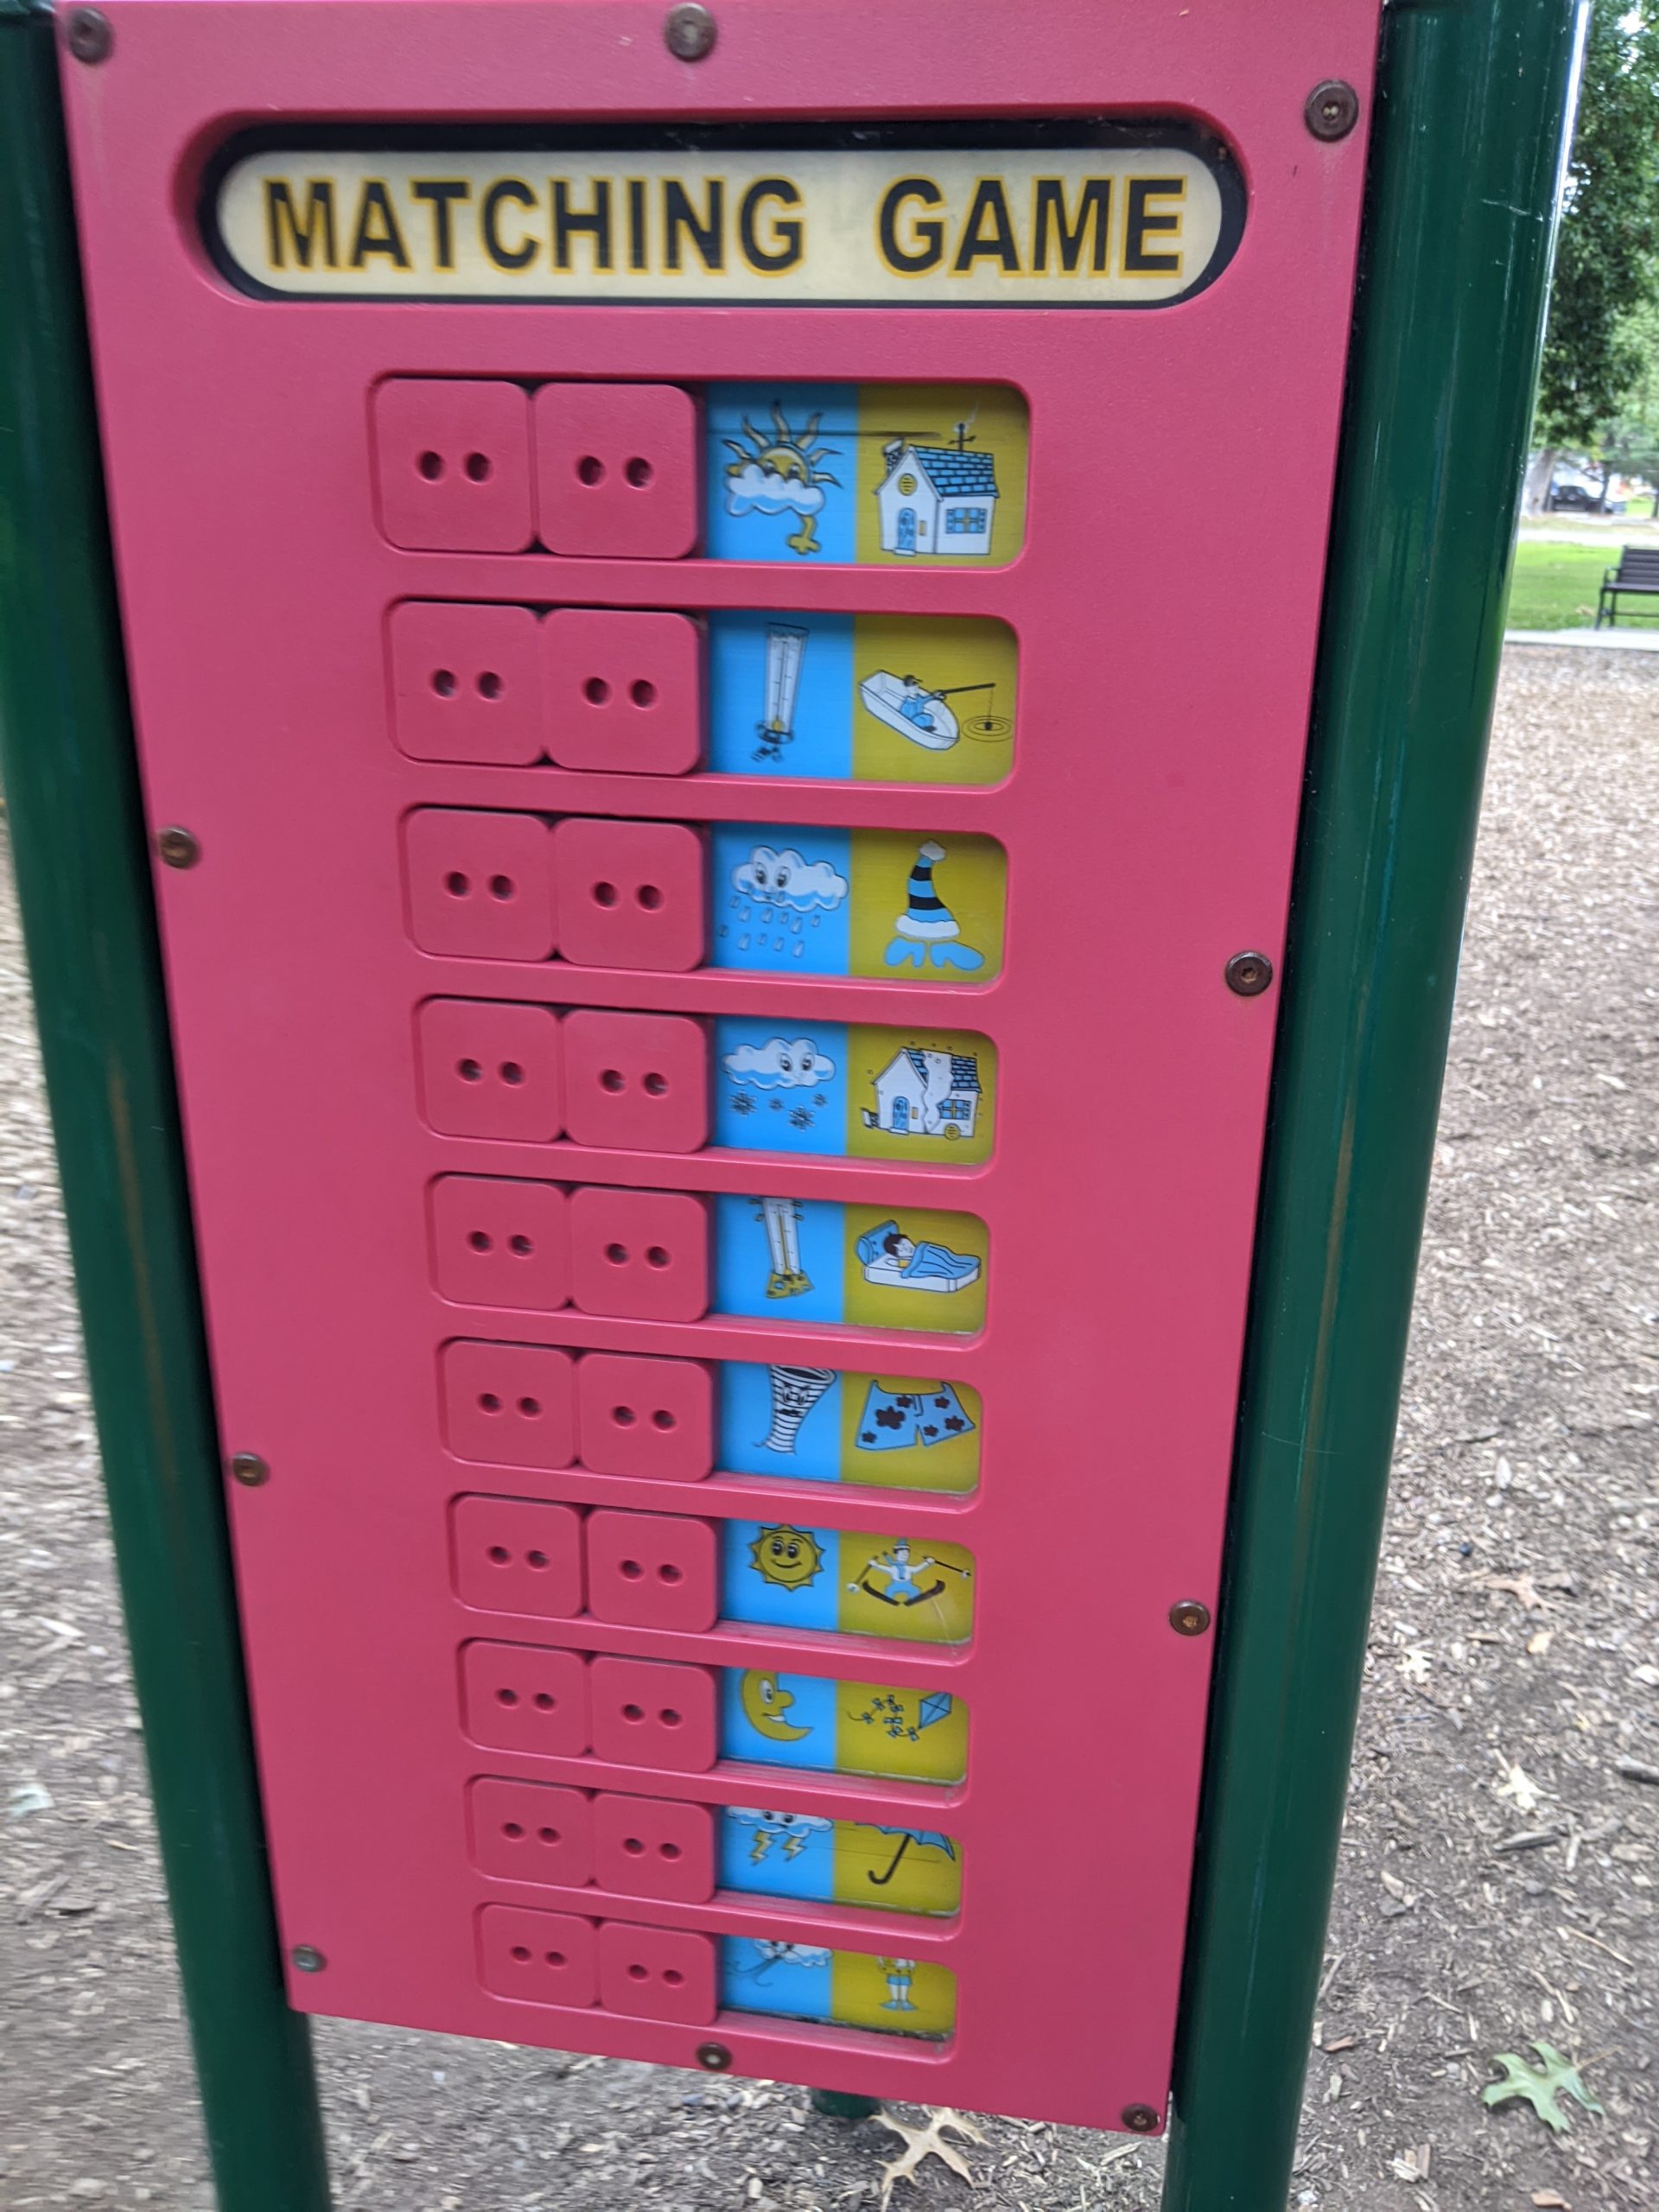 FEATURES - Matching game_ At Red Bank Battlefield Park Playground in National Park NJ